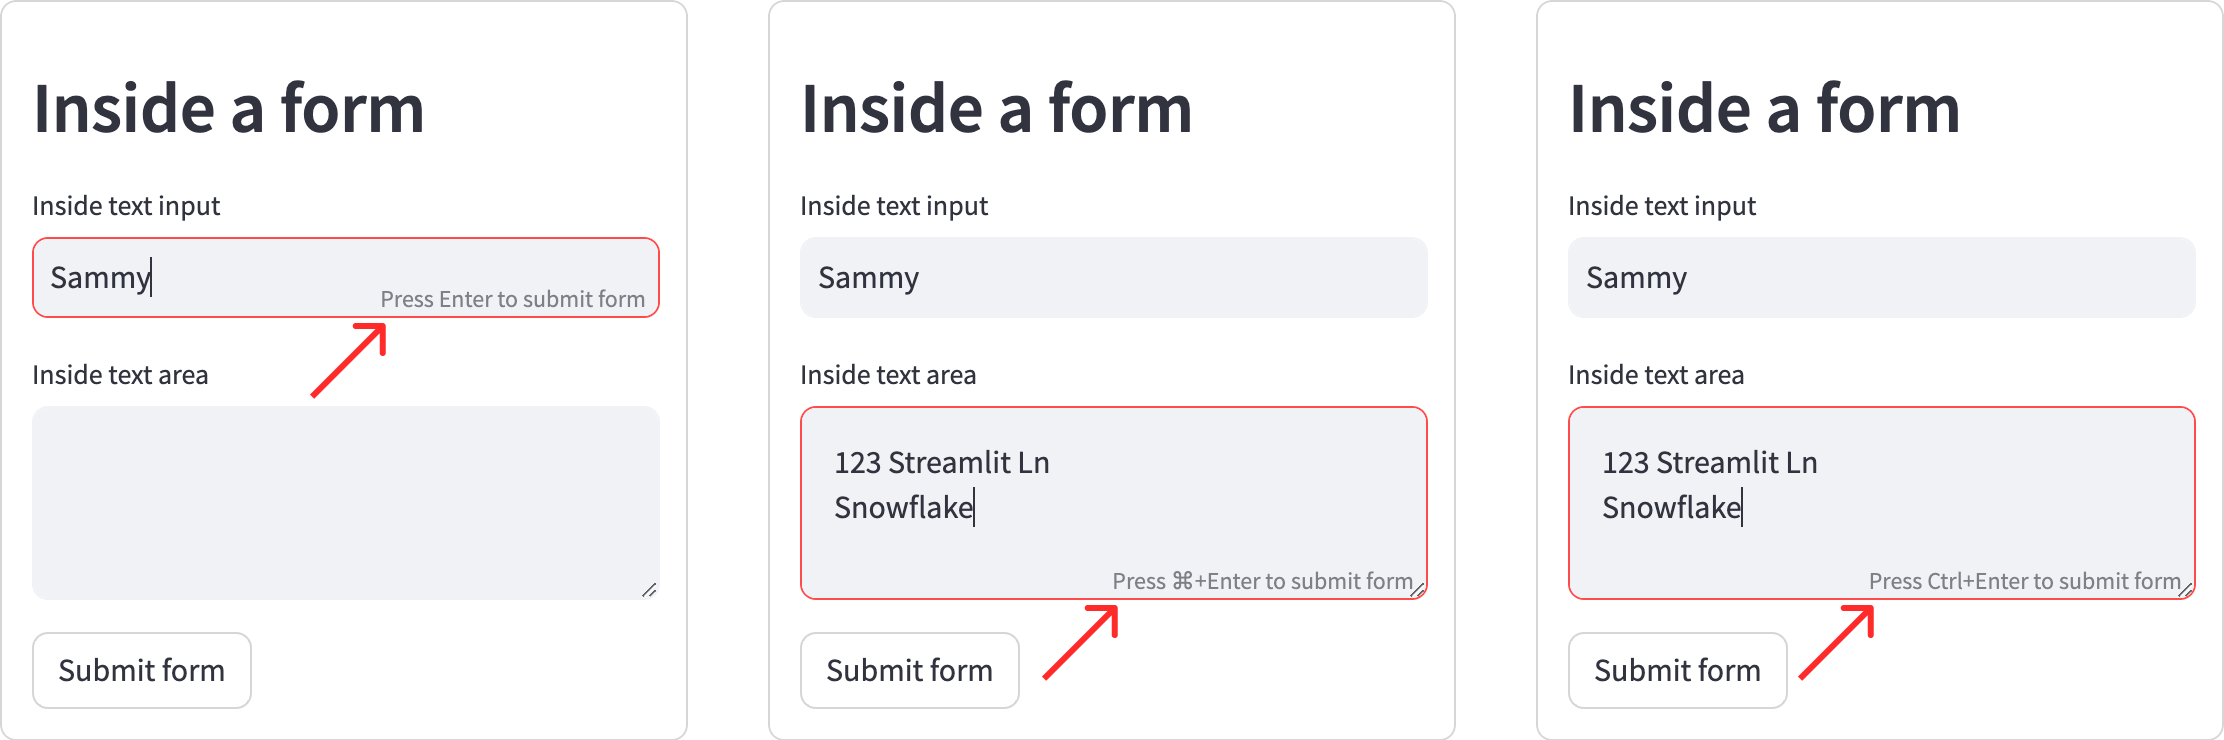 Keyboard-submit forms